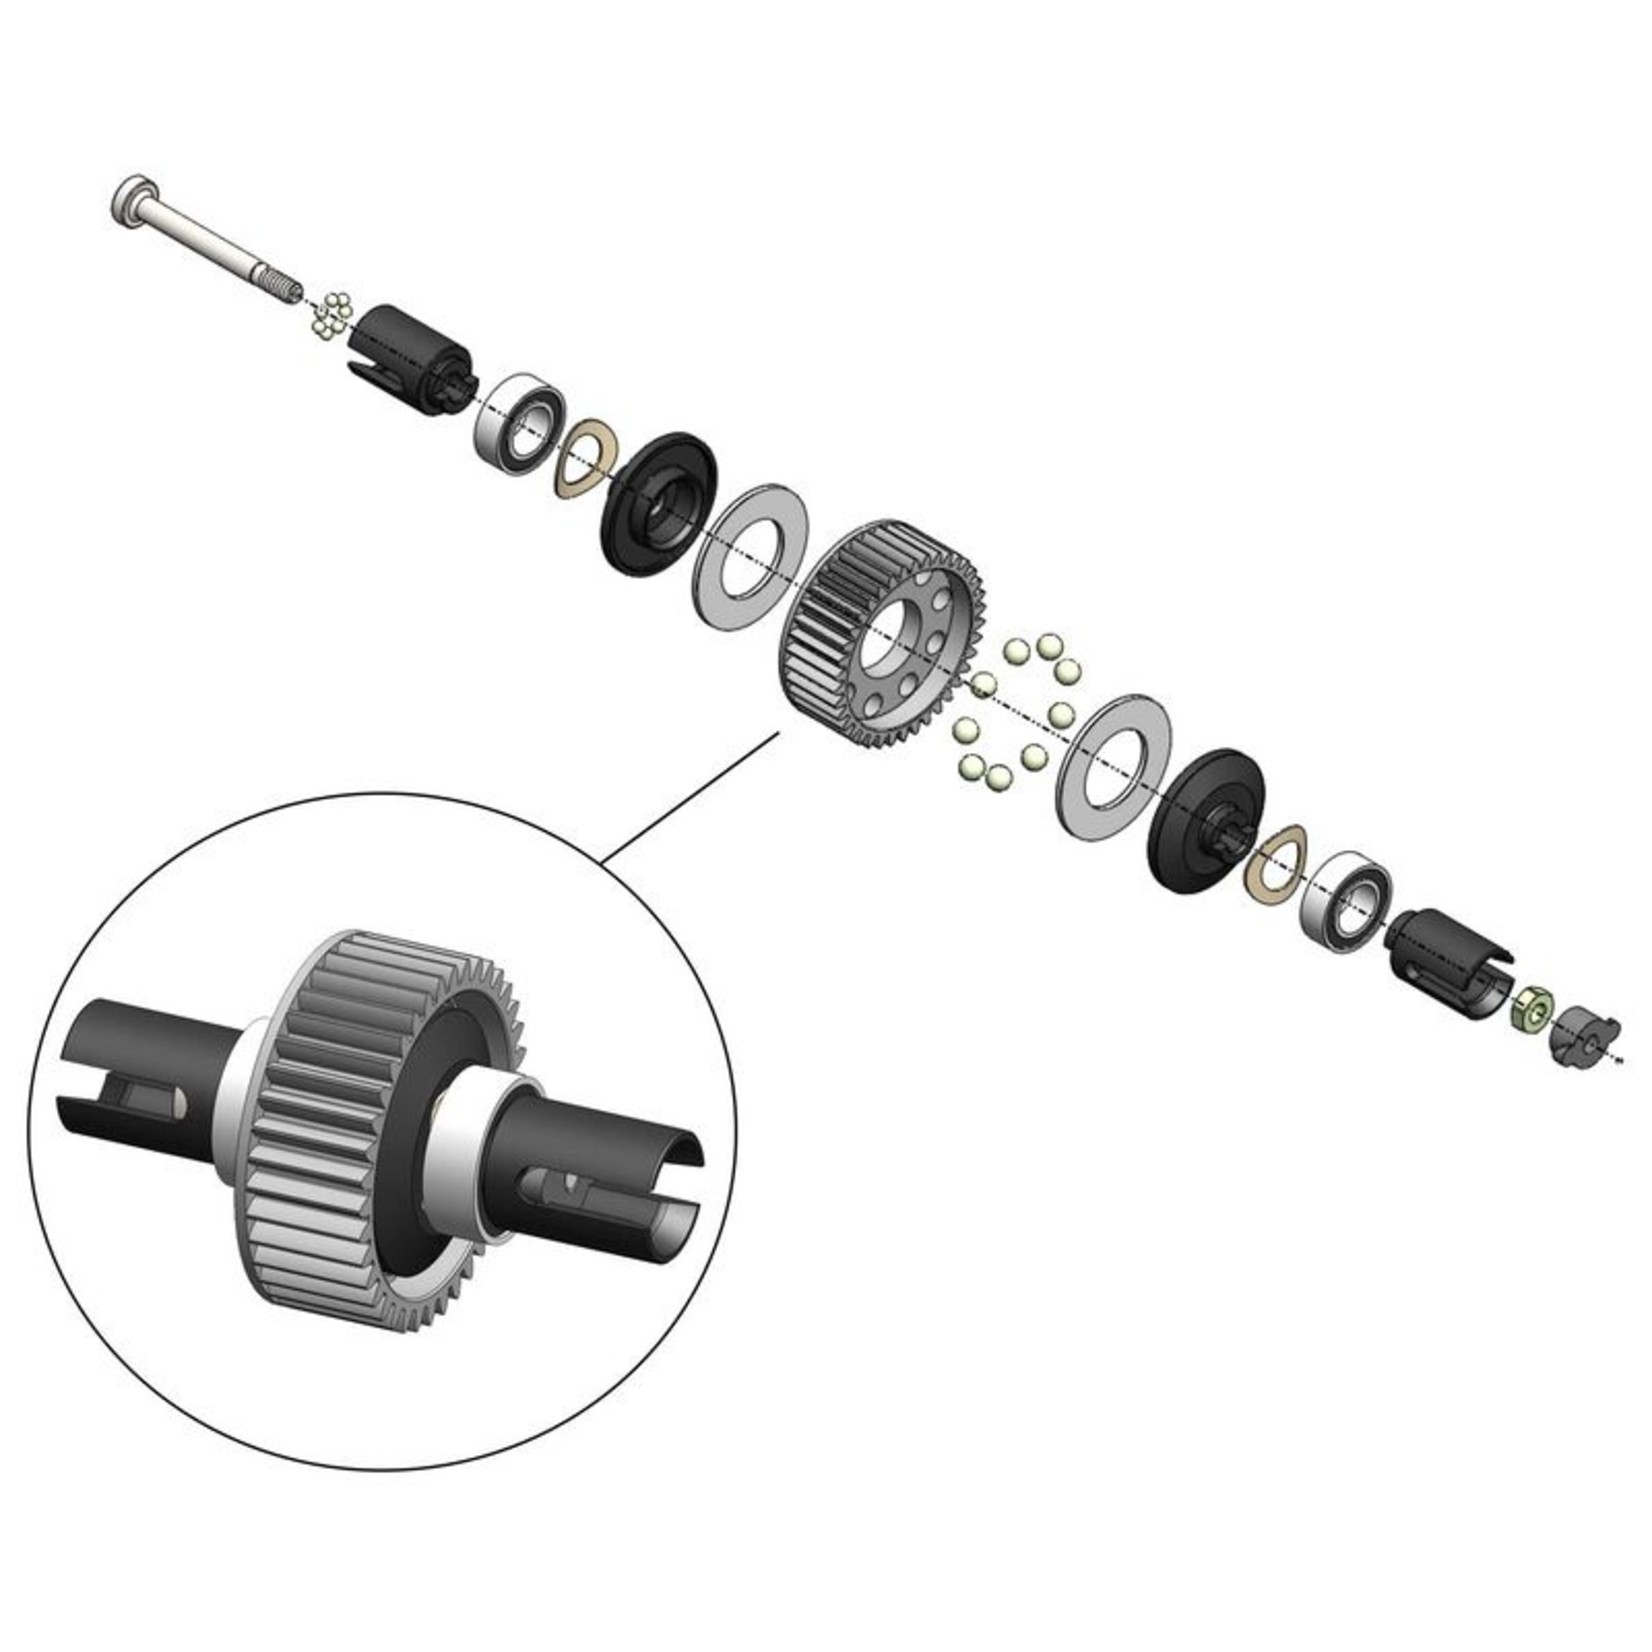 MIP - Moore's Ideal Products MIP20090  MIP Ball Differential Kit, for Losi Mini-T/B 2.0 Series